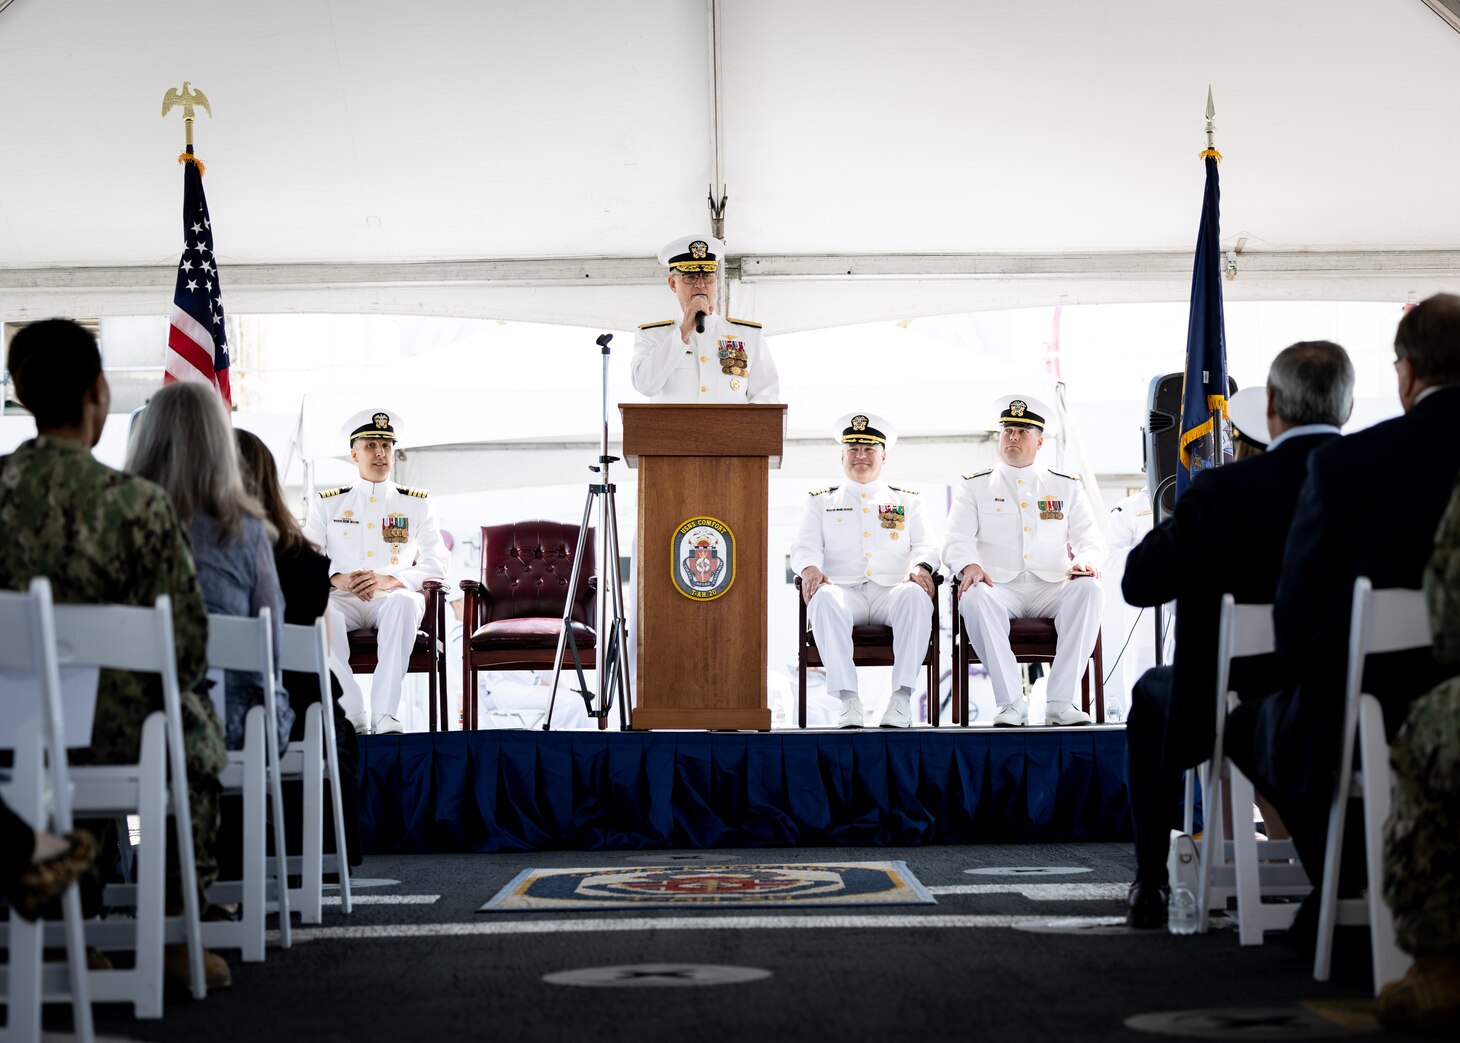 Military Sealift Command’s leadership in the Atlantic changed hands, when Navy Capt. James A. Murdock relieved Navy Capt. Daniel E. Broadhurst as commander of Norfolk-based Military Sealift Command Atlantic (MSC Atlantic) during a change of command ceremony held aboard Navy hospital ship USNS Comfort (T-AH-20) in Naval Station Norfolk April 13, 2023. Pictured at the podium is MSC Commander Rear Adm. Michael A. Wettlaufer.